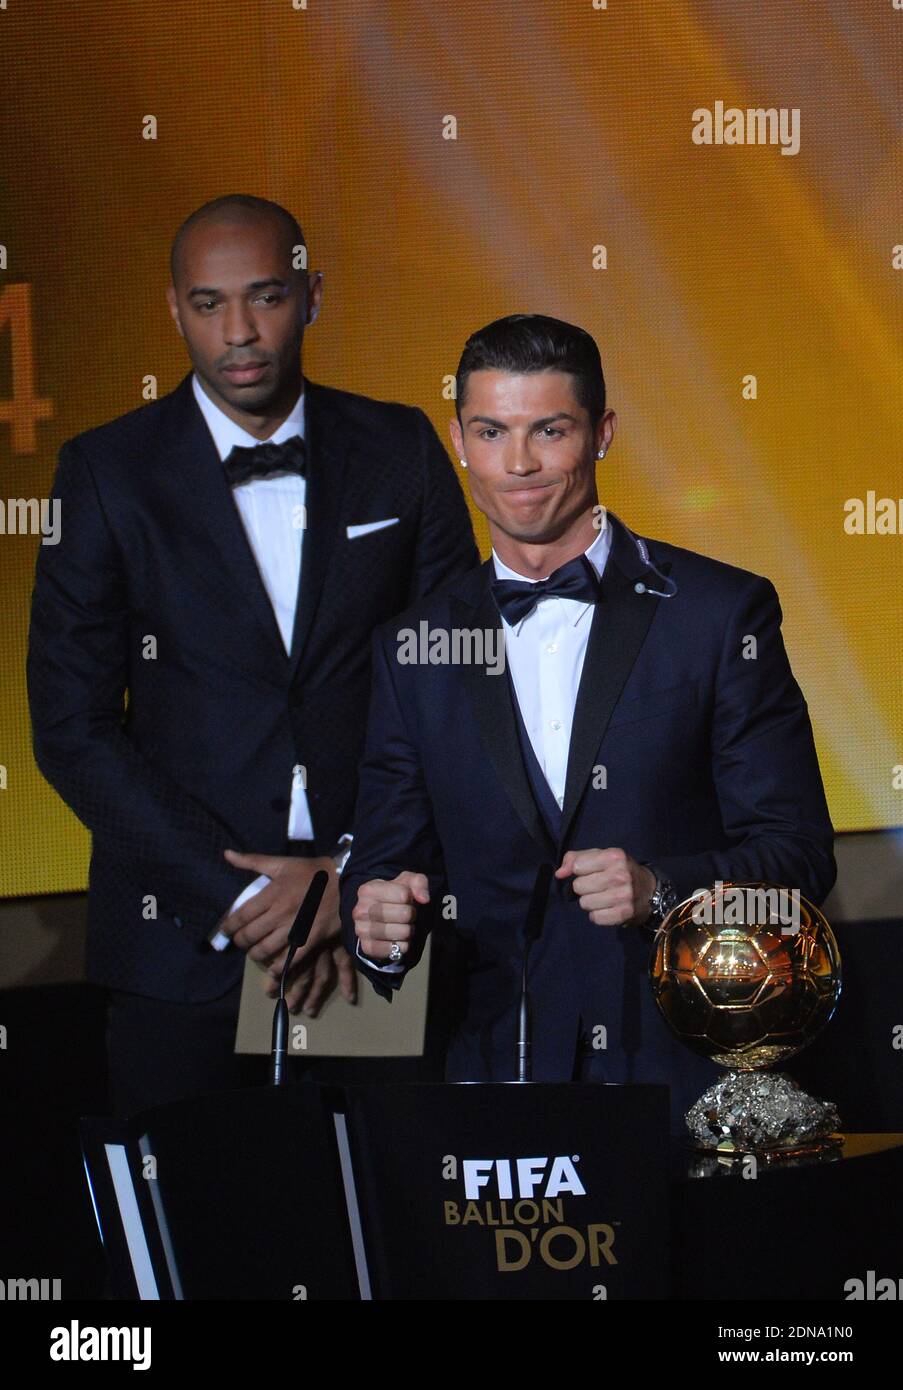 Real Madrid and Portugal forward Cristiano Ronaldo receiving his third Ballon  D'Or with Thierry Henry during the FIFA Ballon D'Or 2014 Award Gala at the  Kongresshalle in Zurich, Switzerland on January 12,